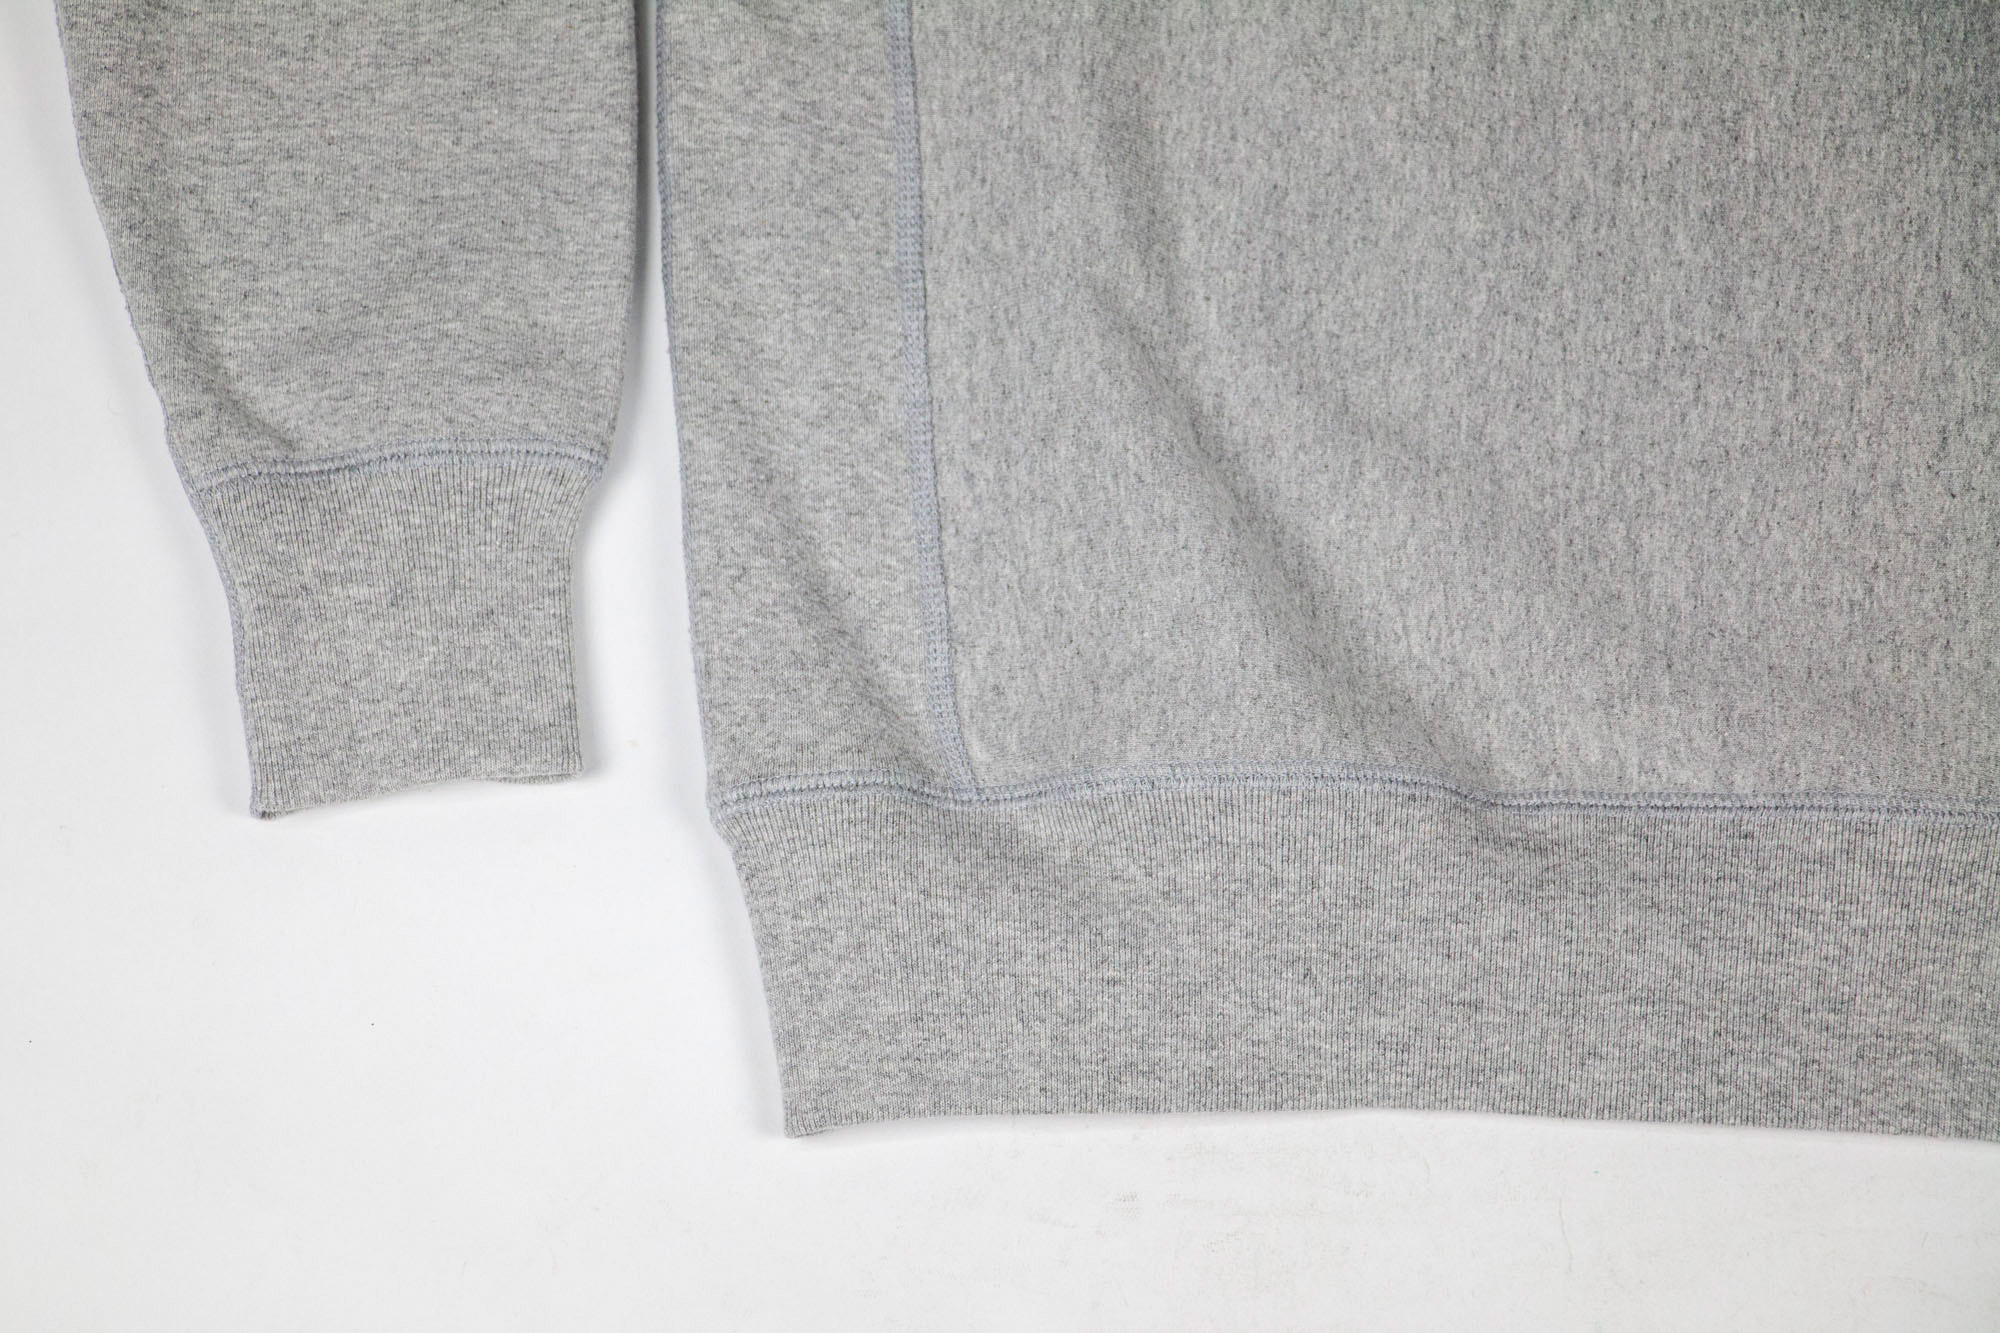 House of Blanks Sweats Have Everything But a Label